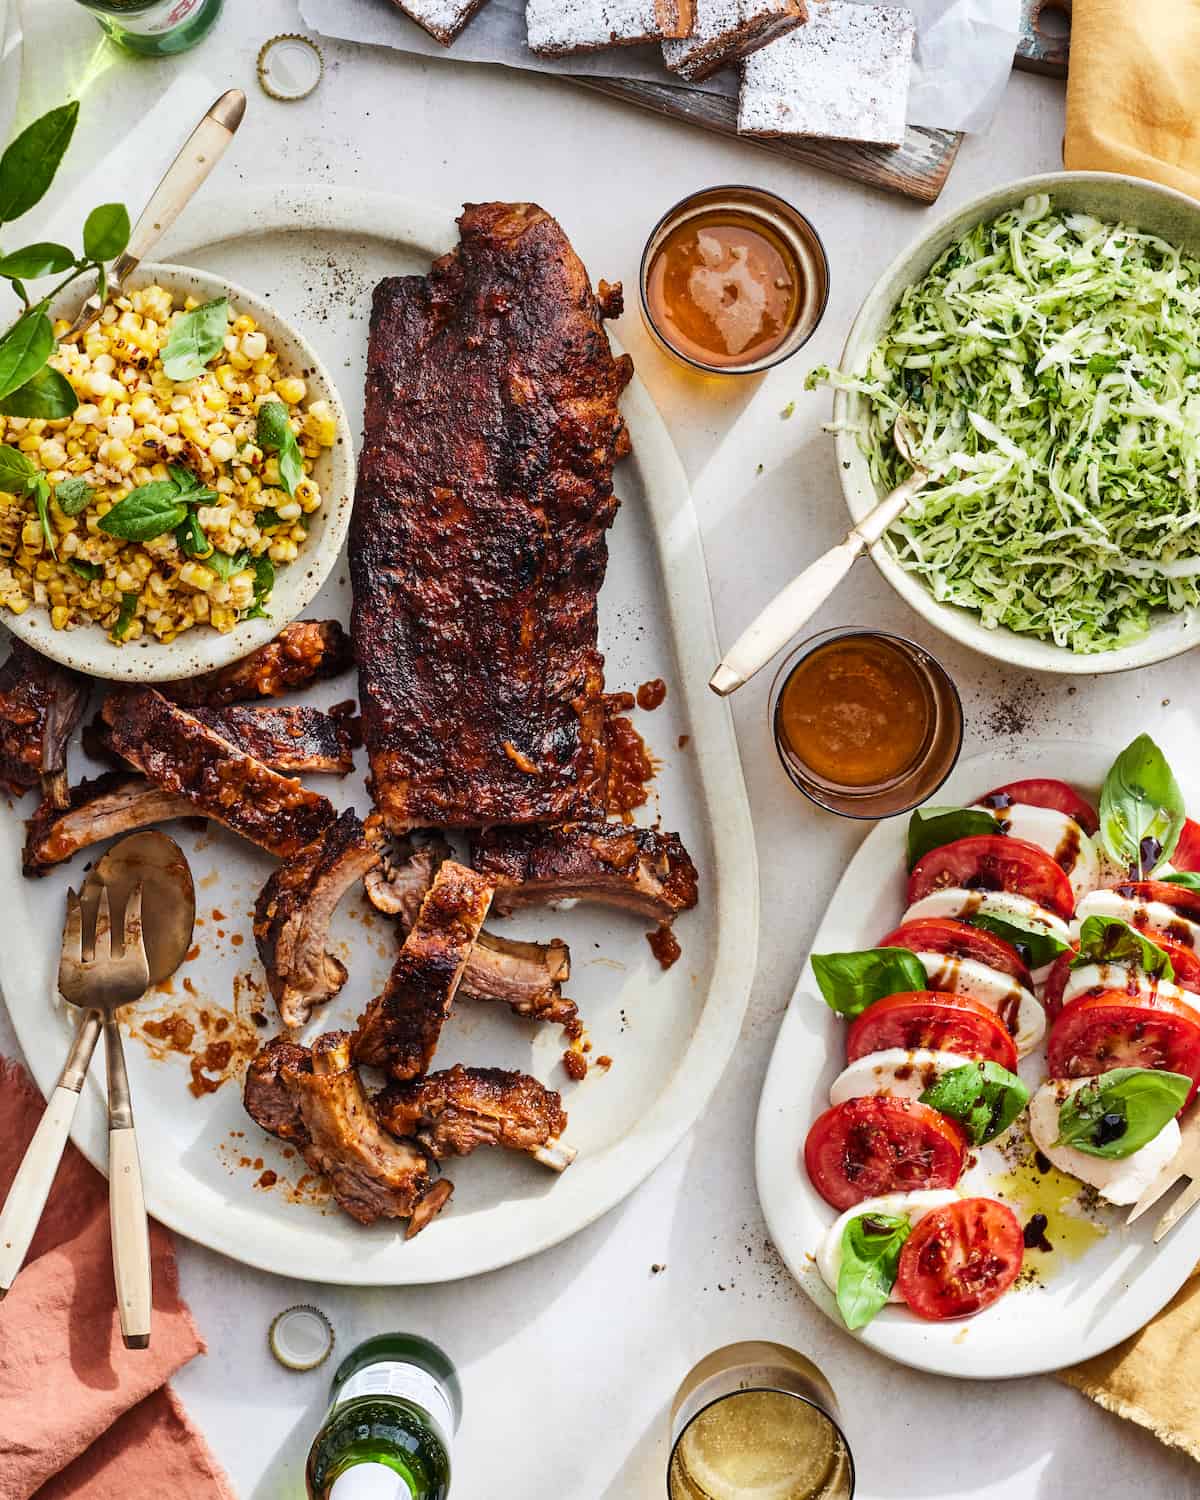 A full ribs dinner party with a side of Cabbage Salad, a traditional caprese and a corn salad